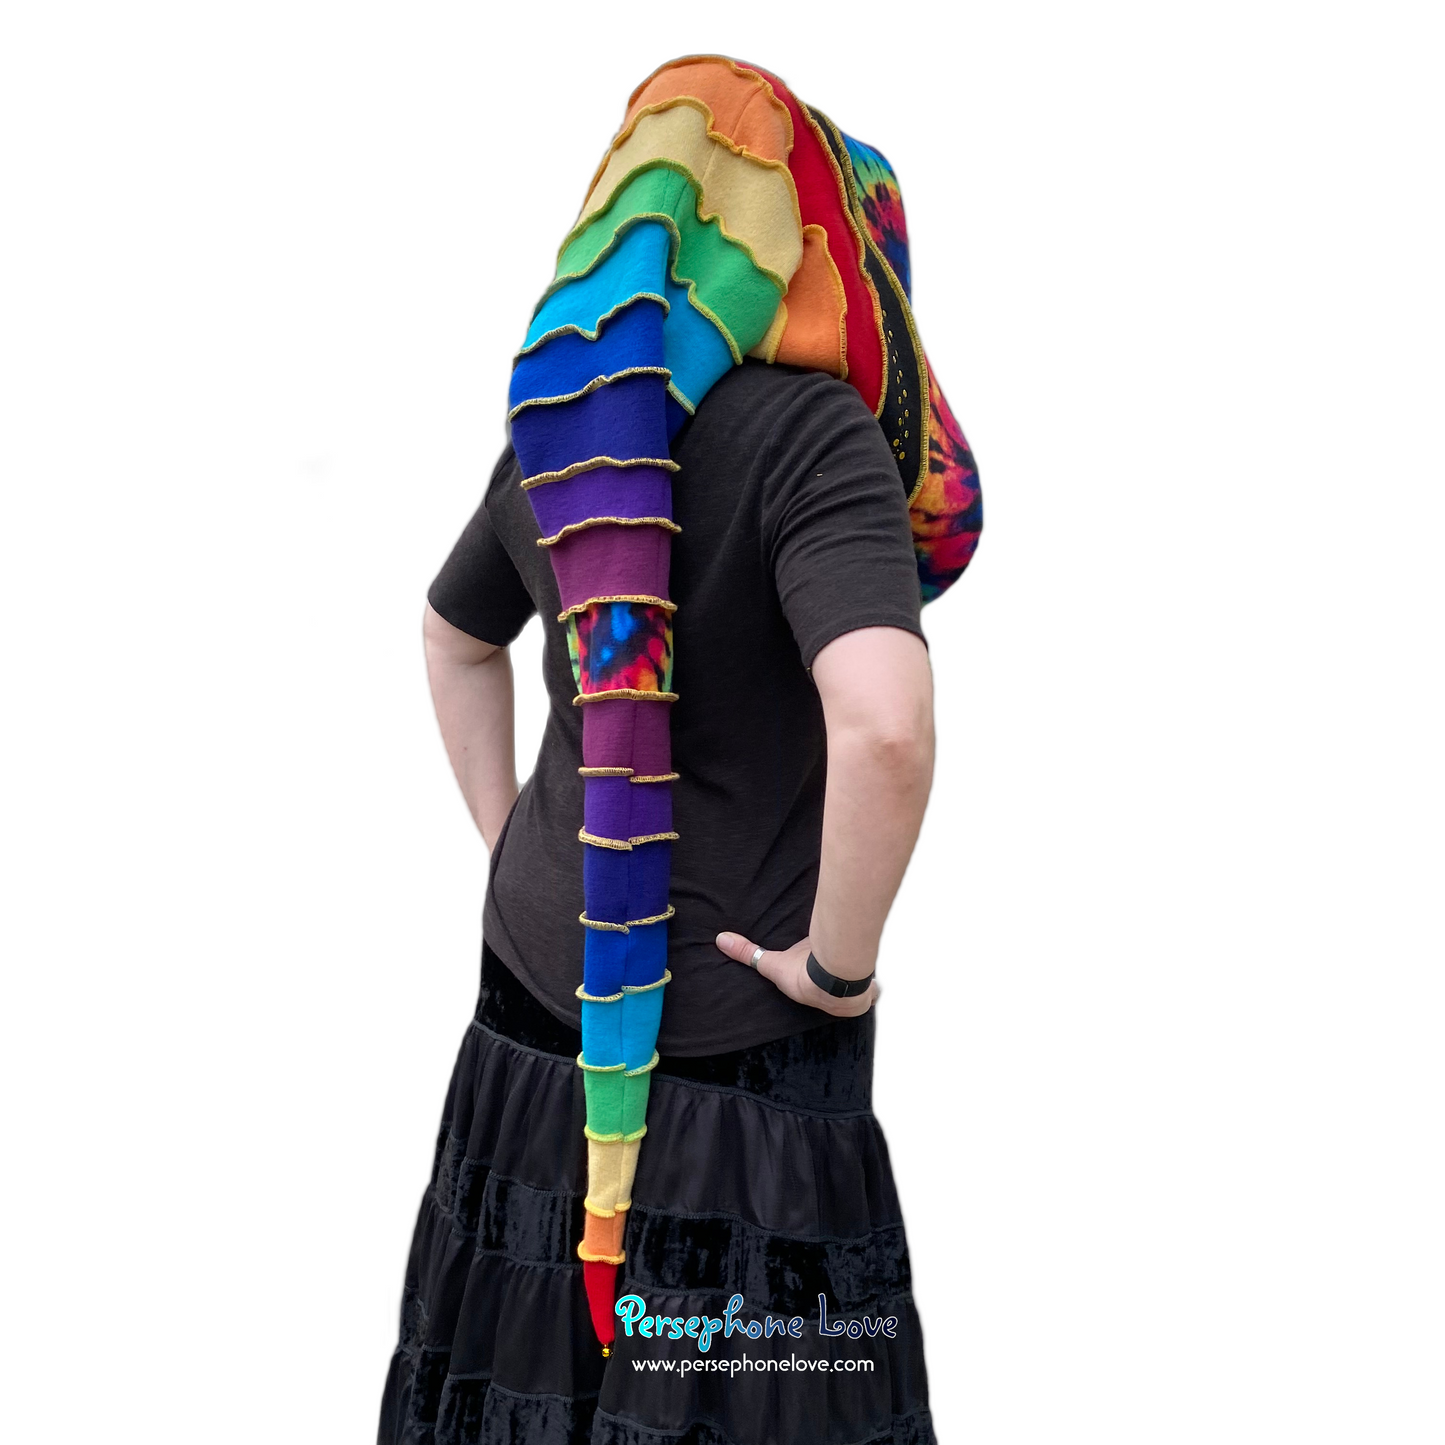 Katwise inspired rainbow felted cashmere/wool recycled sweater elf hat/hood-1599